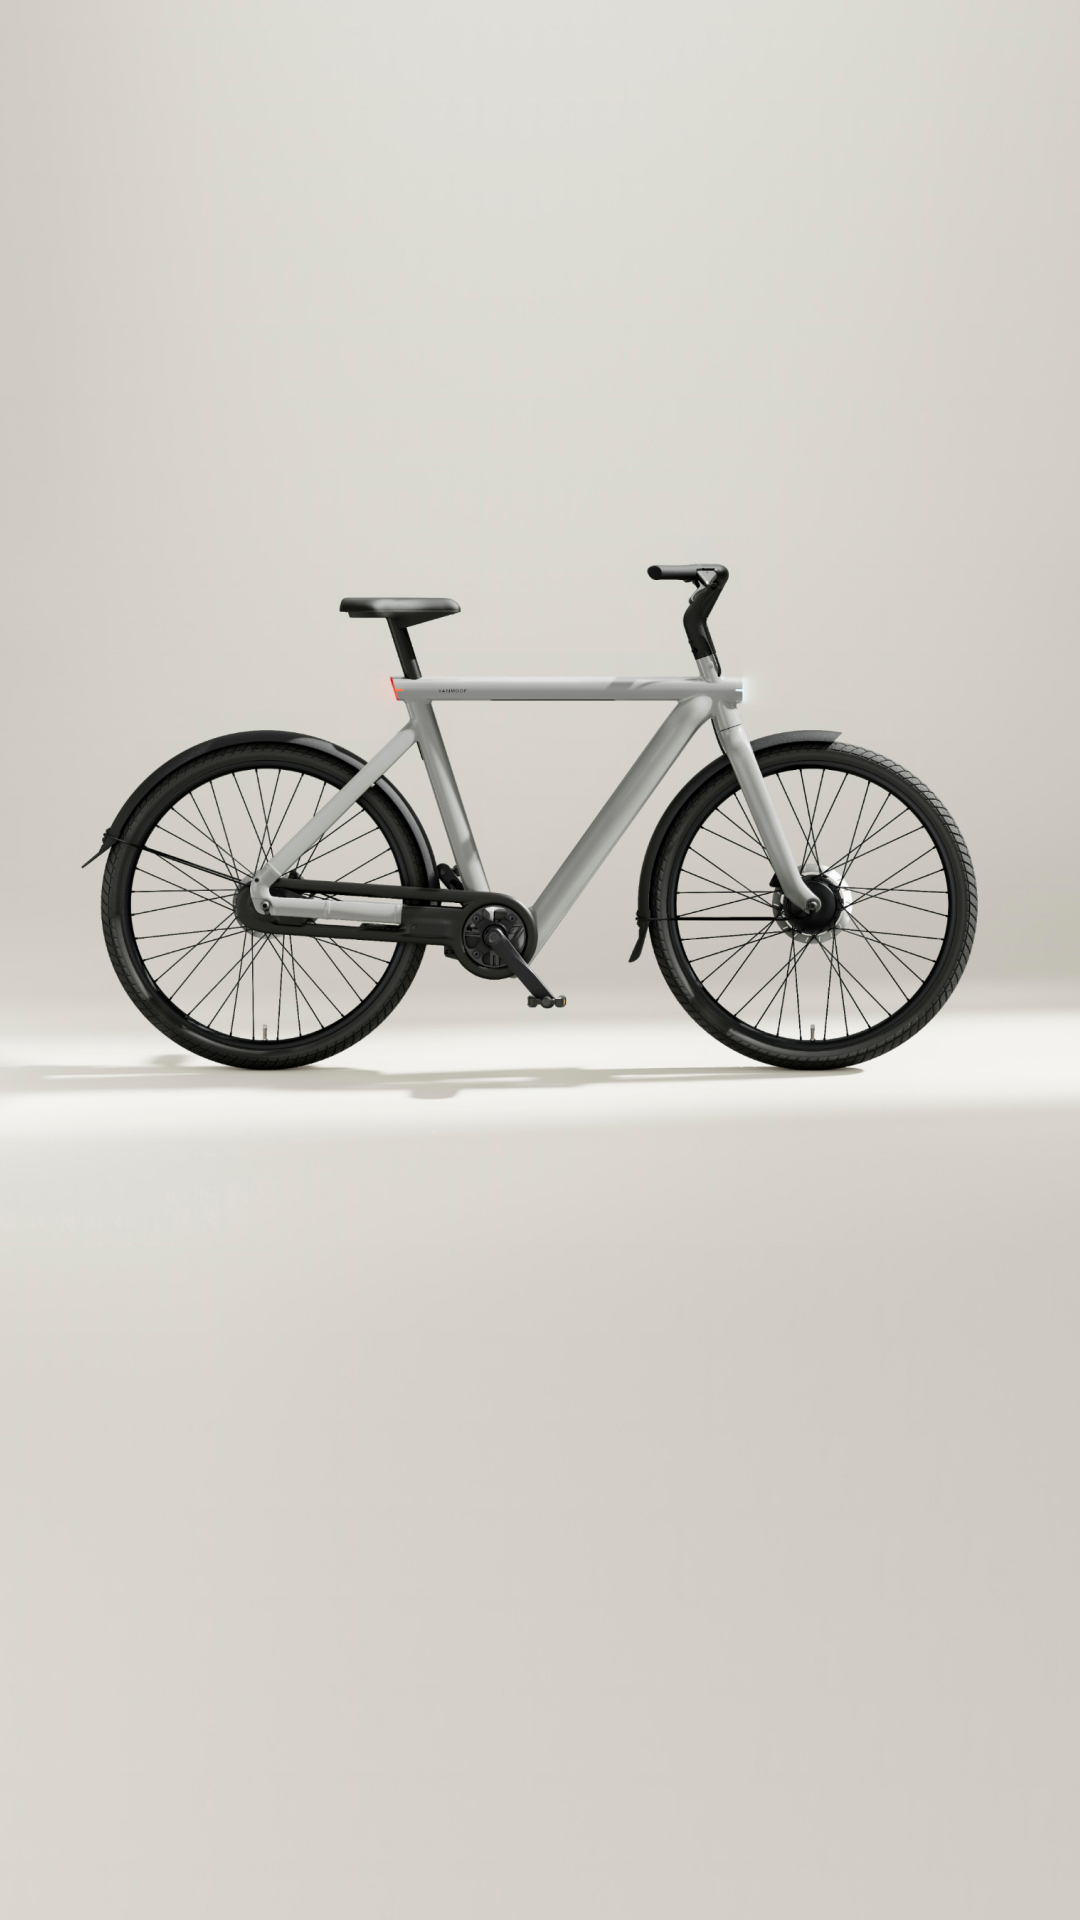 The newly-refined VanMoof S5 & A5